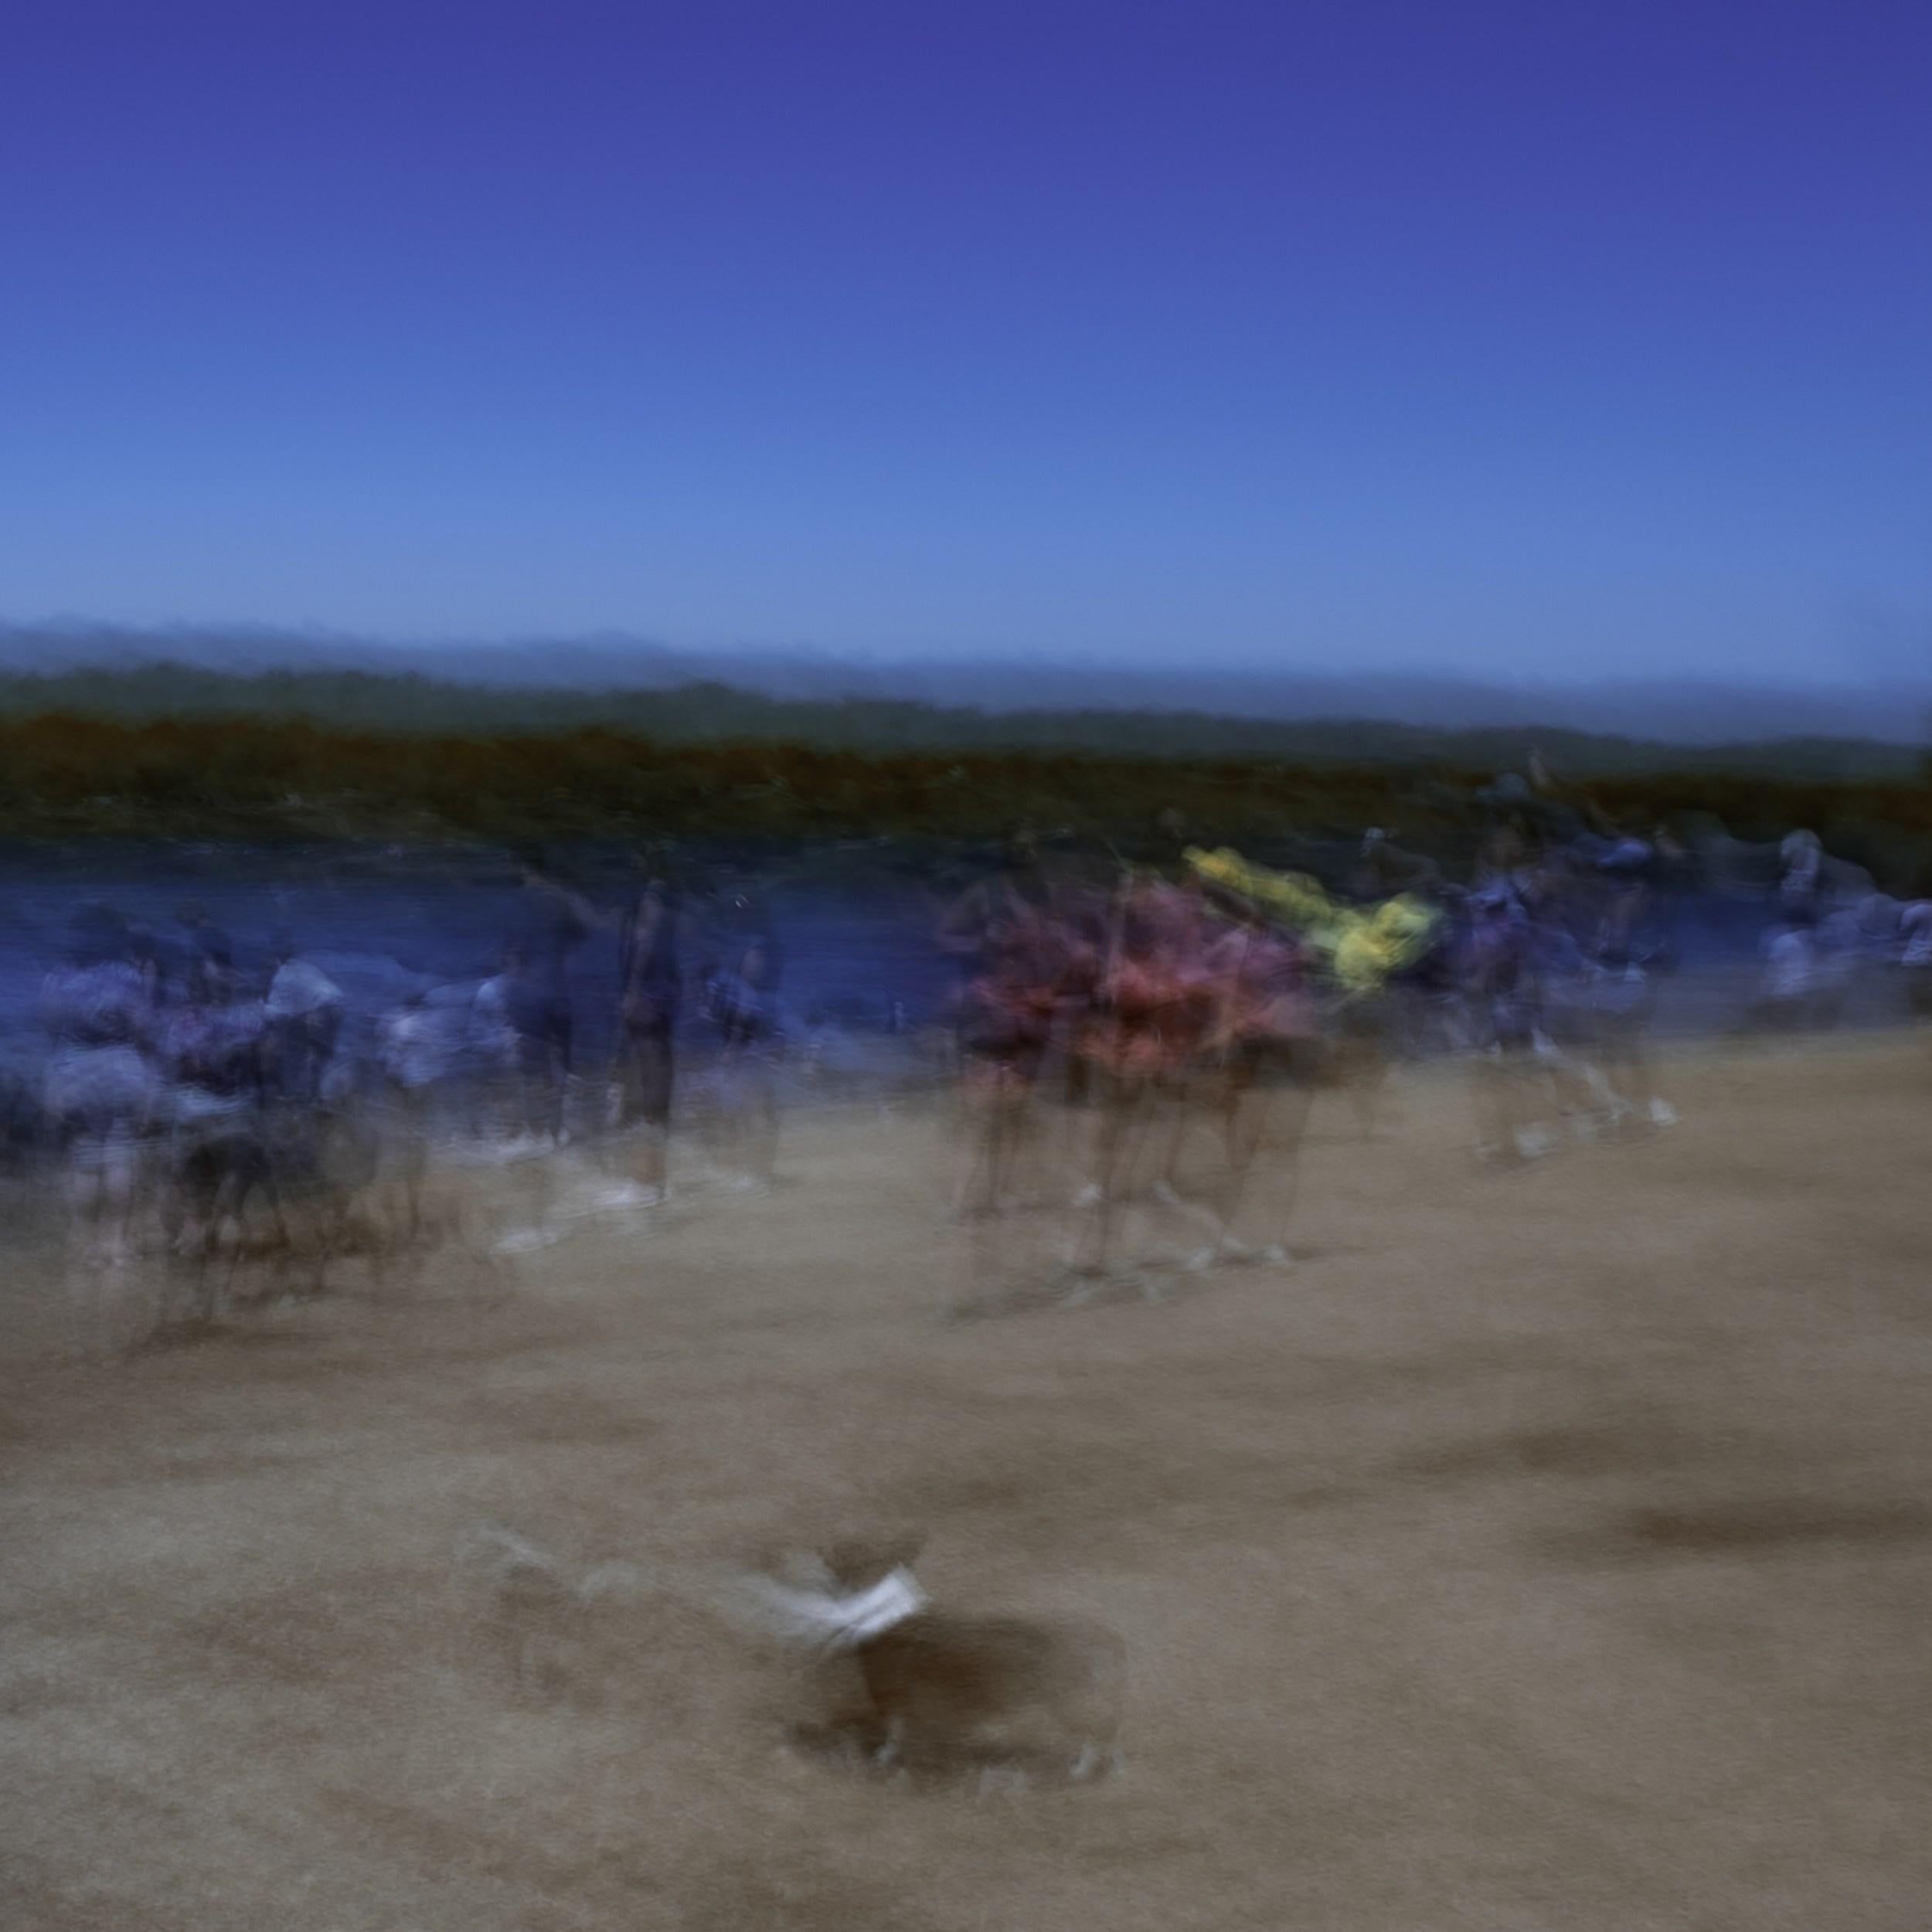 Jeffrey Tamblyn Abstract Photograph - Windy (dogs, dog park, outdoor scene, waterfront, bright colors, motion blur)